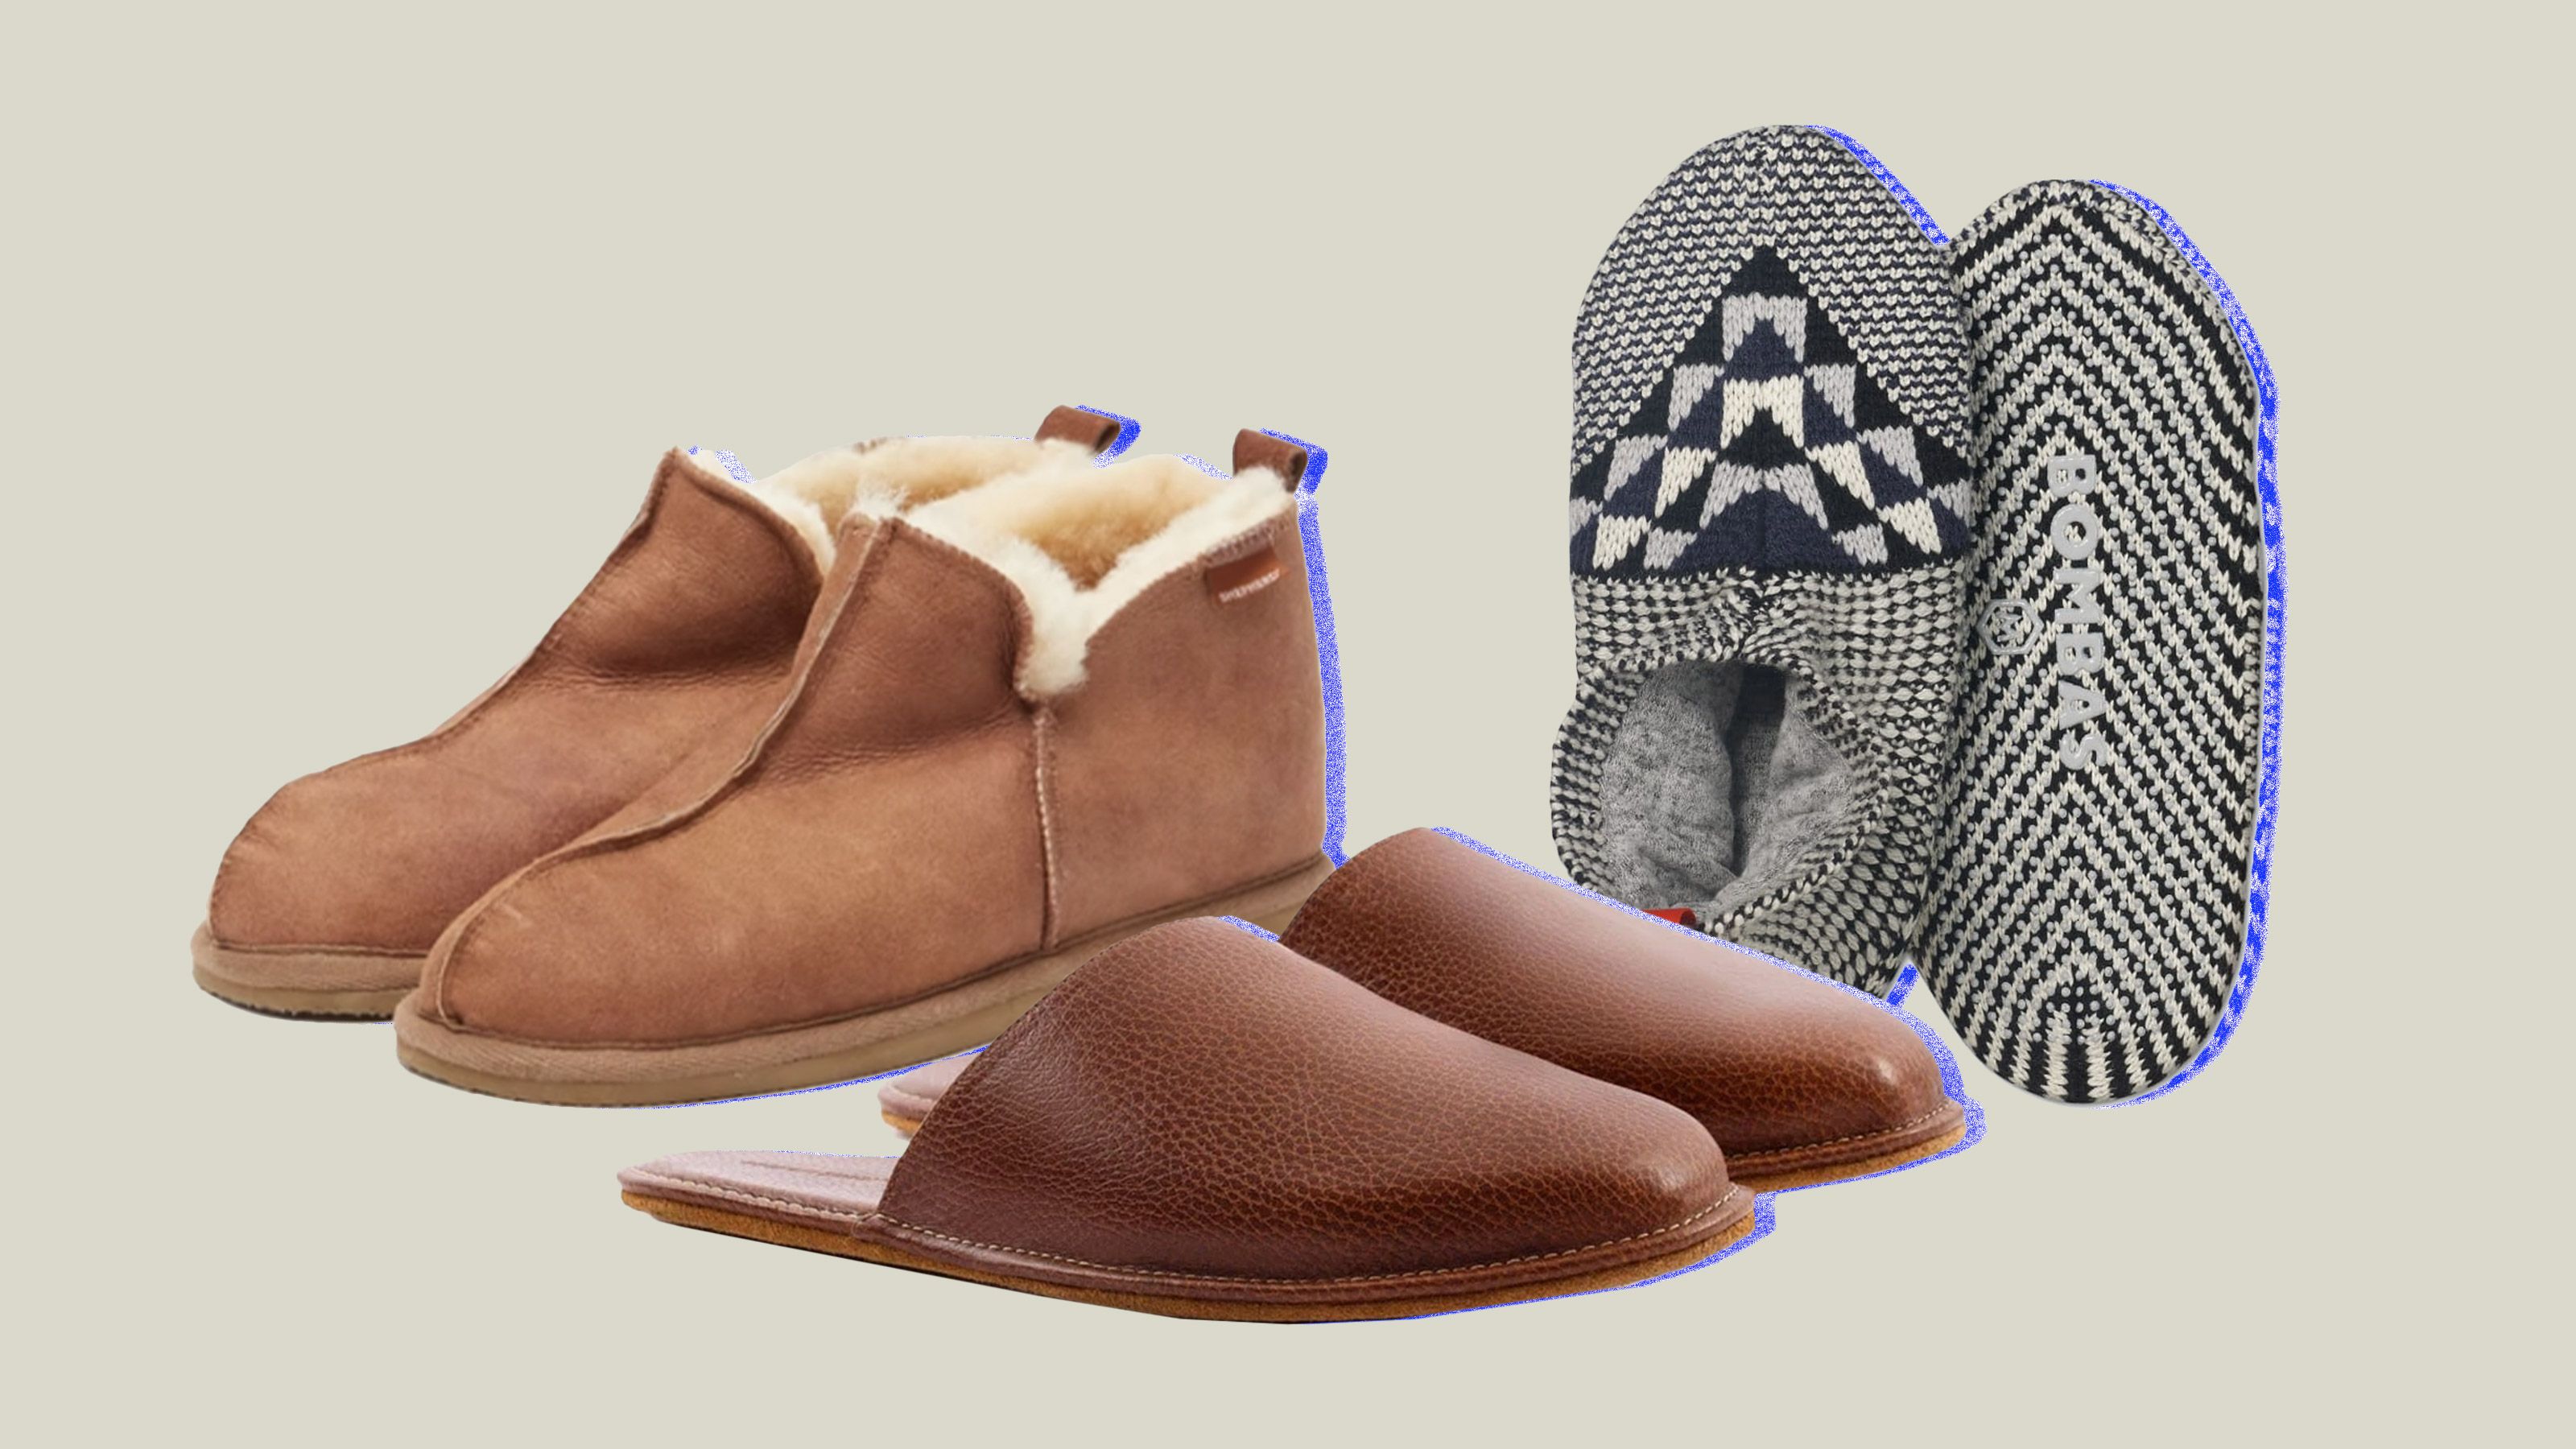 Slippers – Warm Slippers to Wear at Home